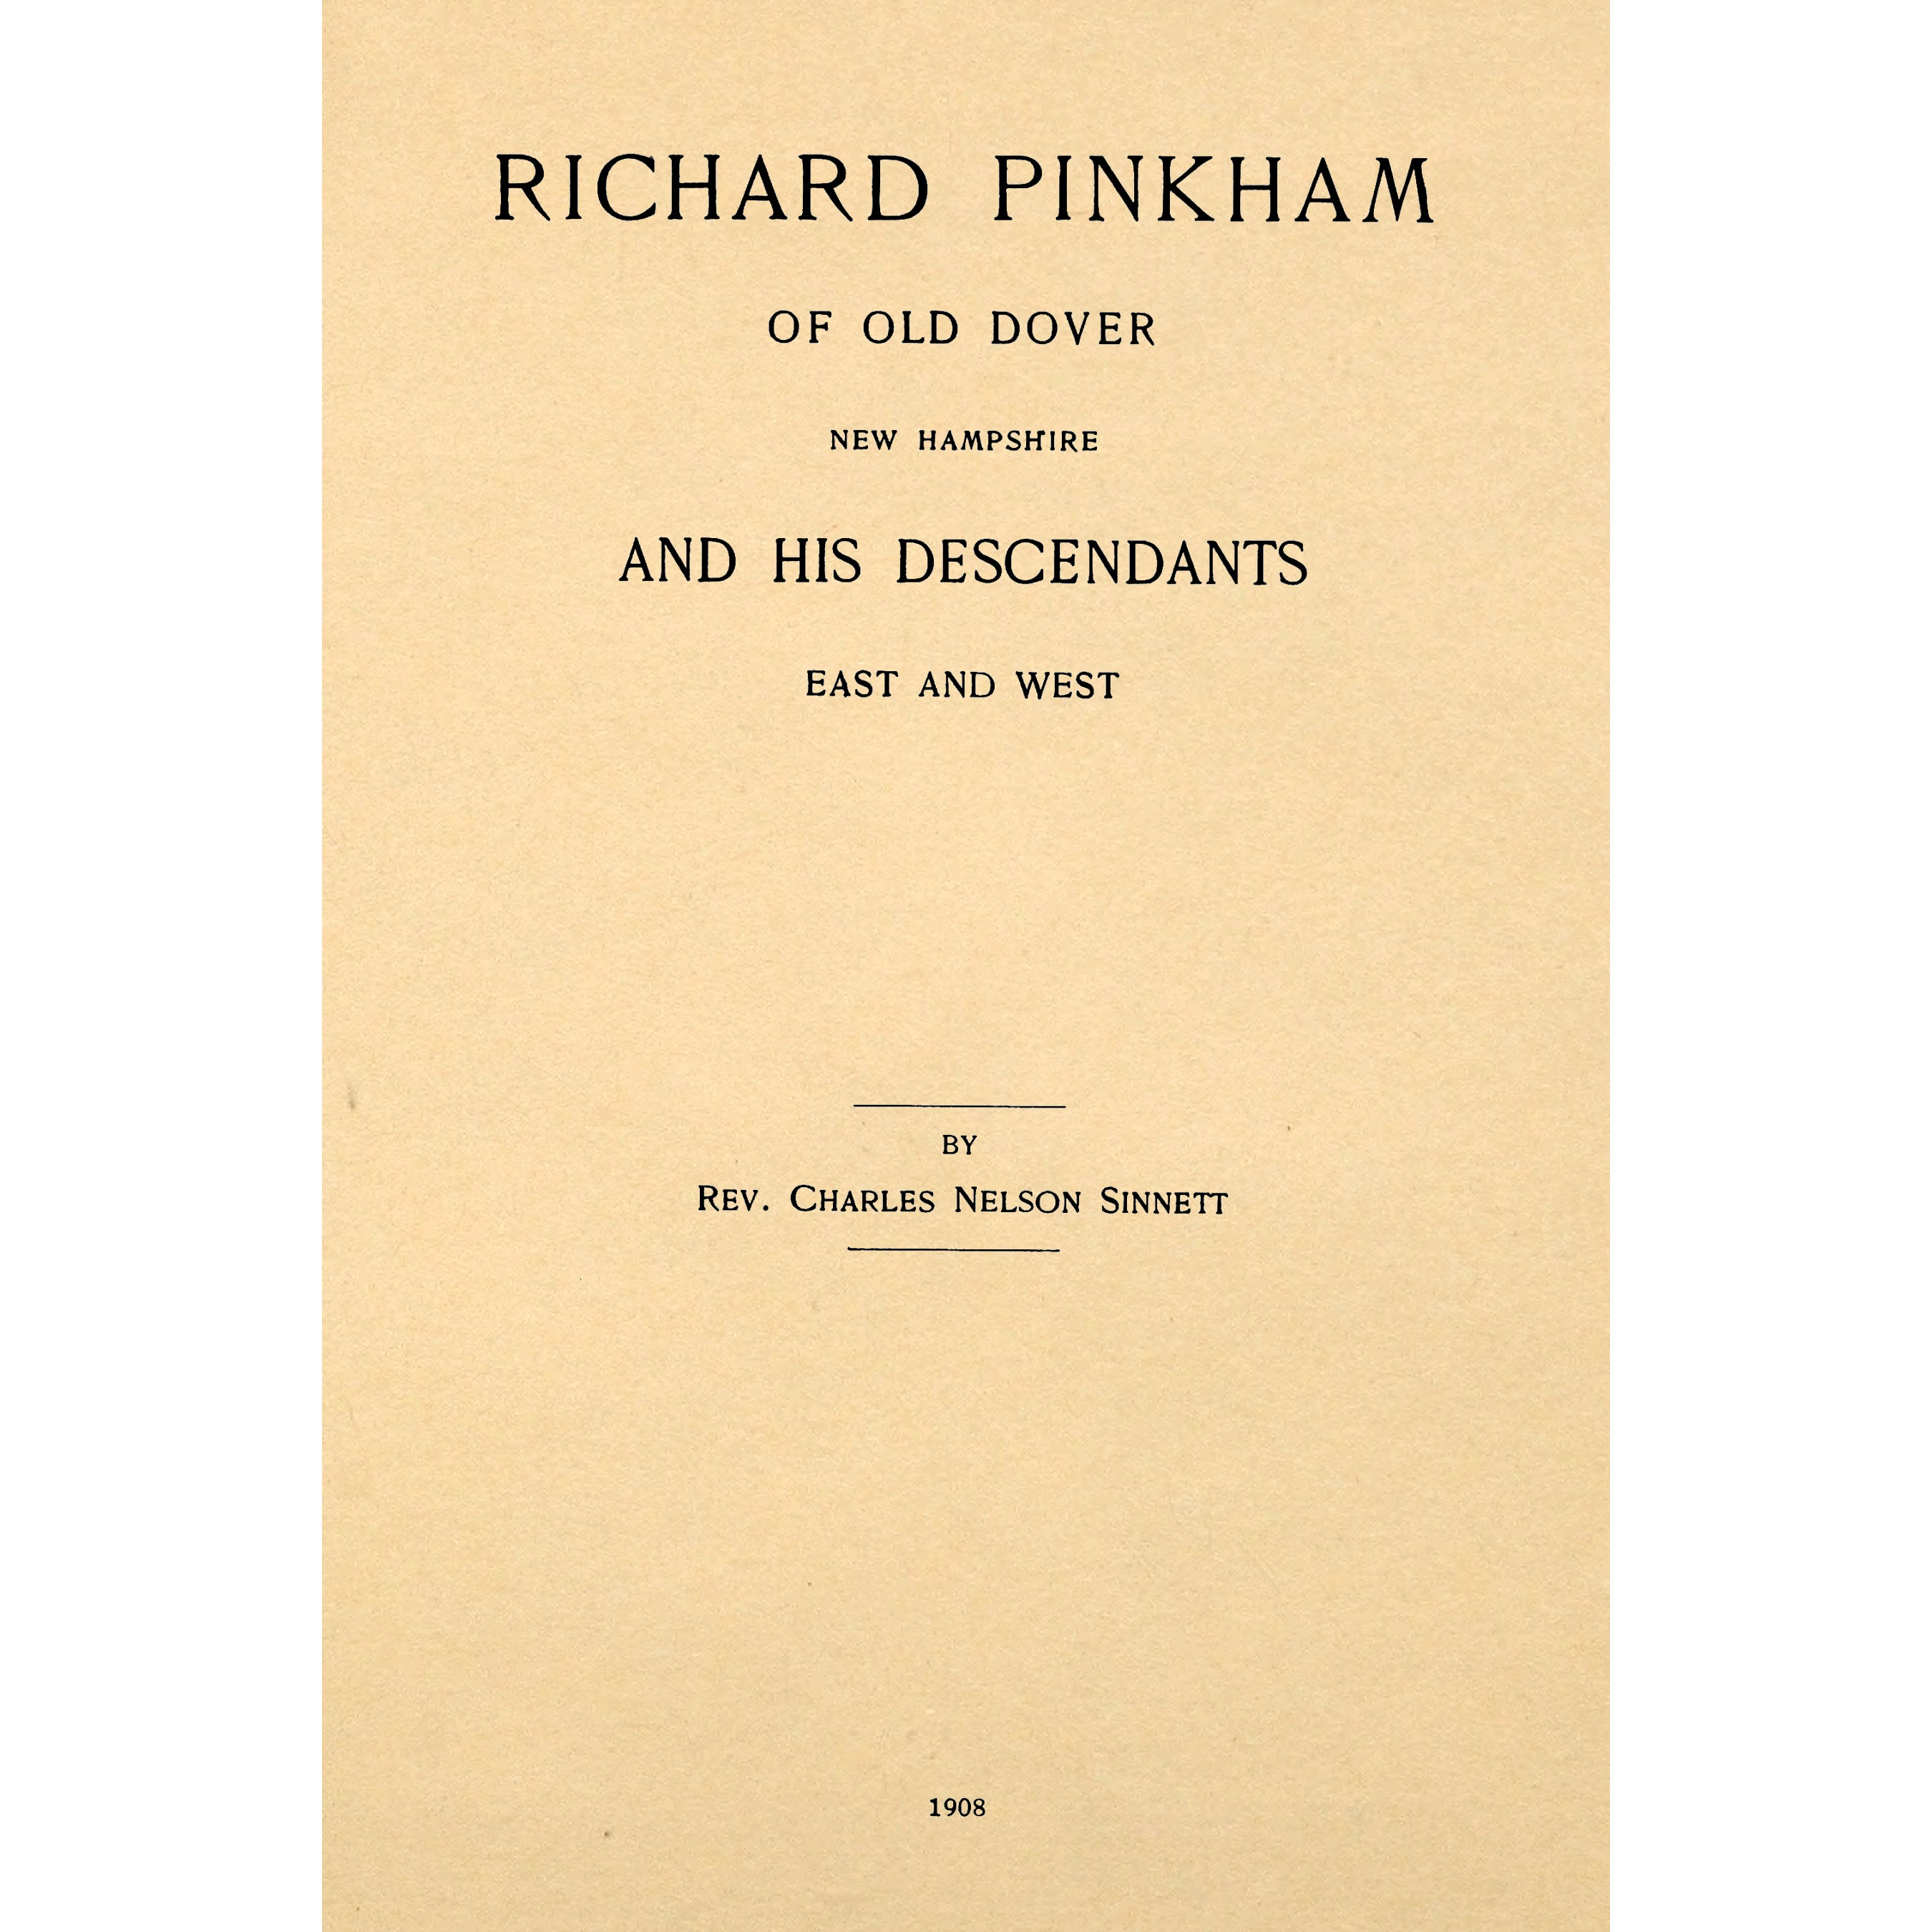 Richard Pinkham of old Dover, New Hampshire and his descendants East and West